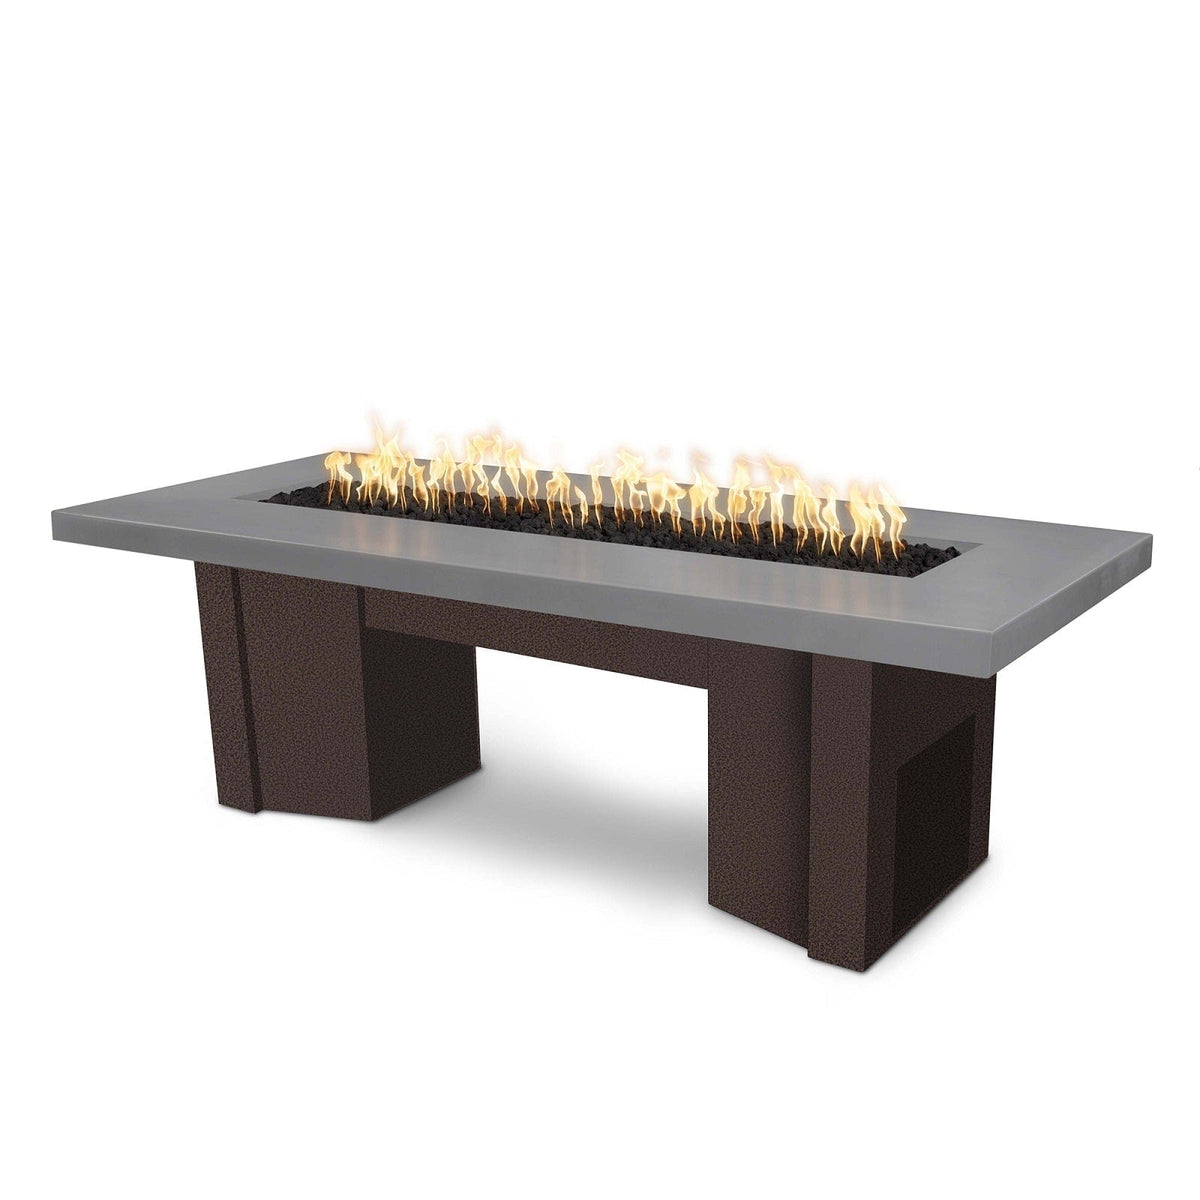 The Outdoor Plus Fire Features Natural Gray (-NGY) / Copper Vein Powder Coated Steel (-CPV) The Outdoor Plus 60&quot; Alameda Fire Table Smooth Concrete in Liquid Propane - Match Lit with Flame Sense System / OPT-ALMGFRC60FSML-LP